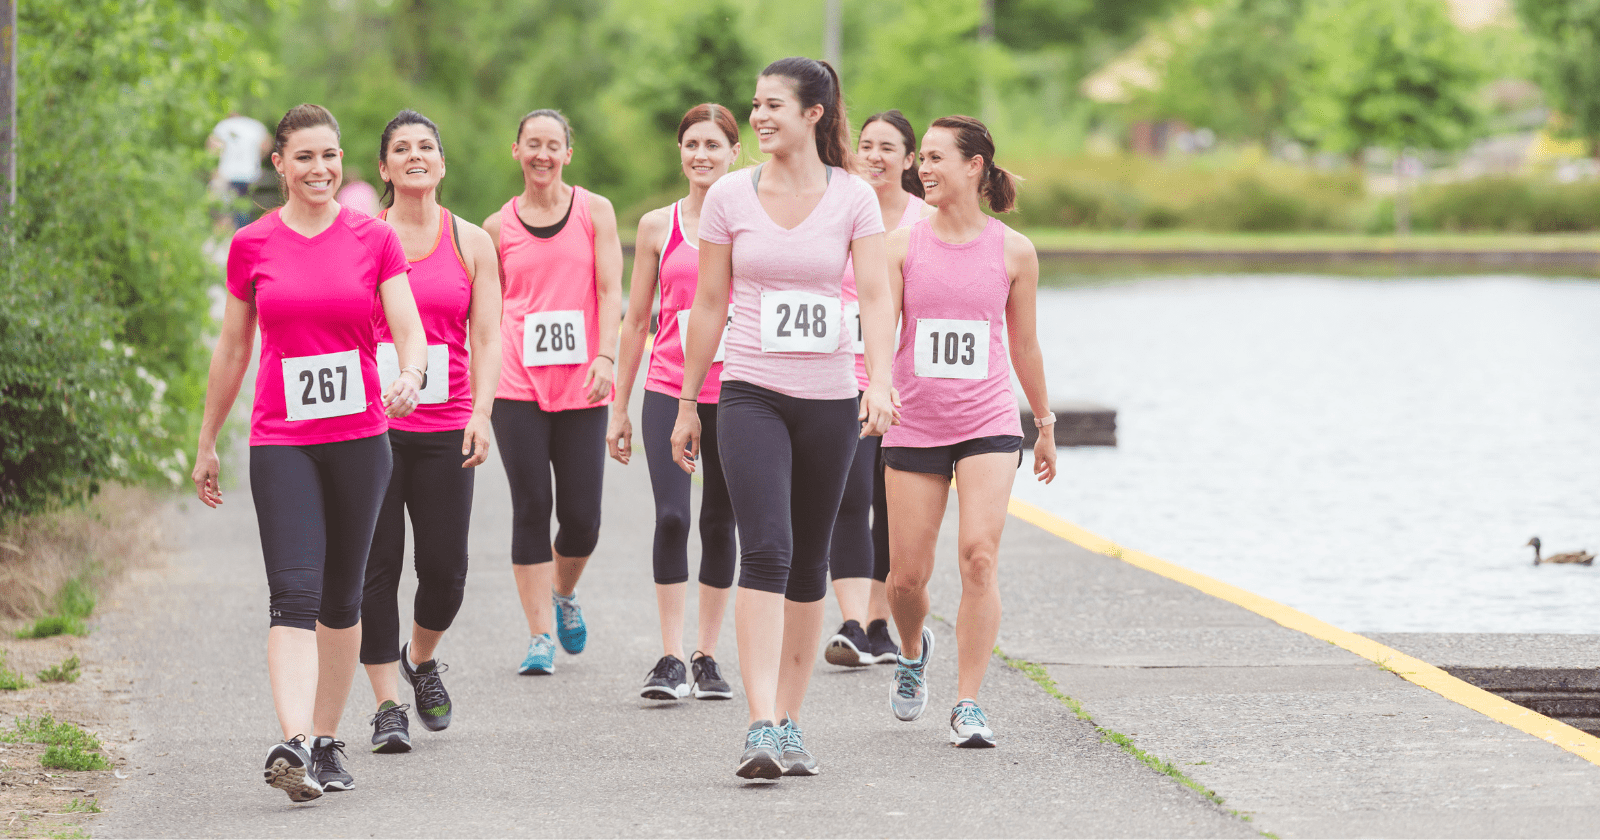 The photo shows a group of cheerful women going for a running marathon.